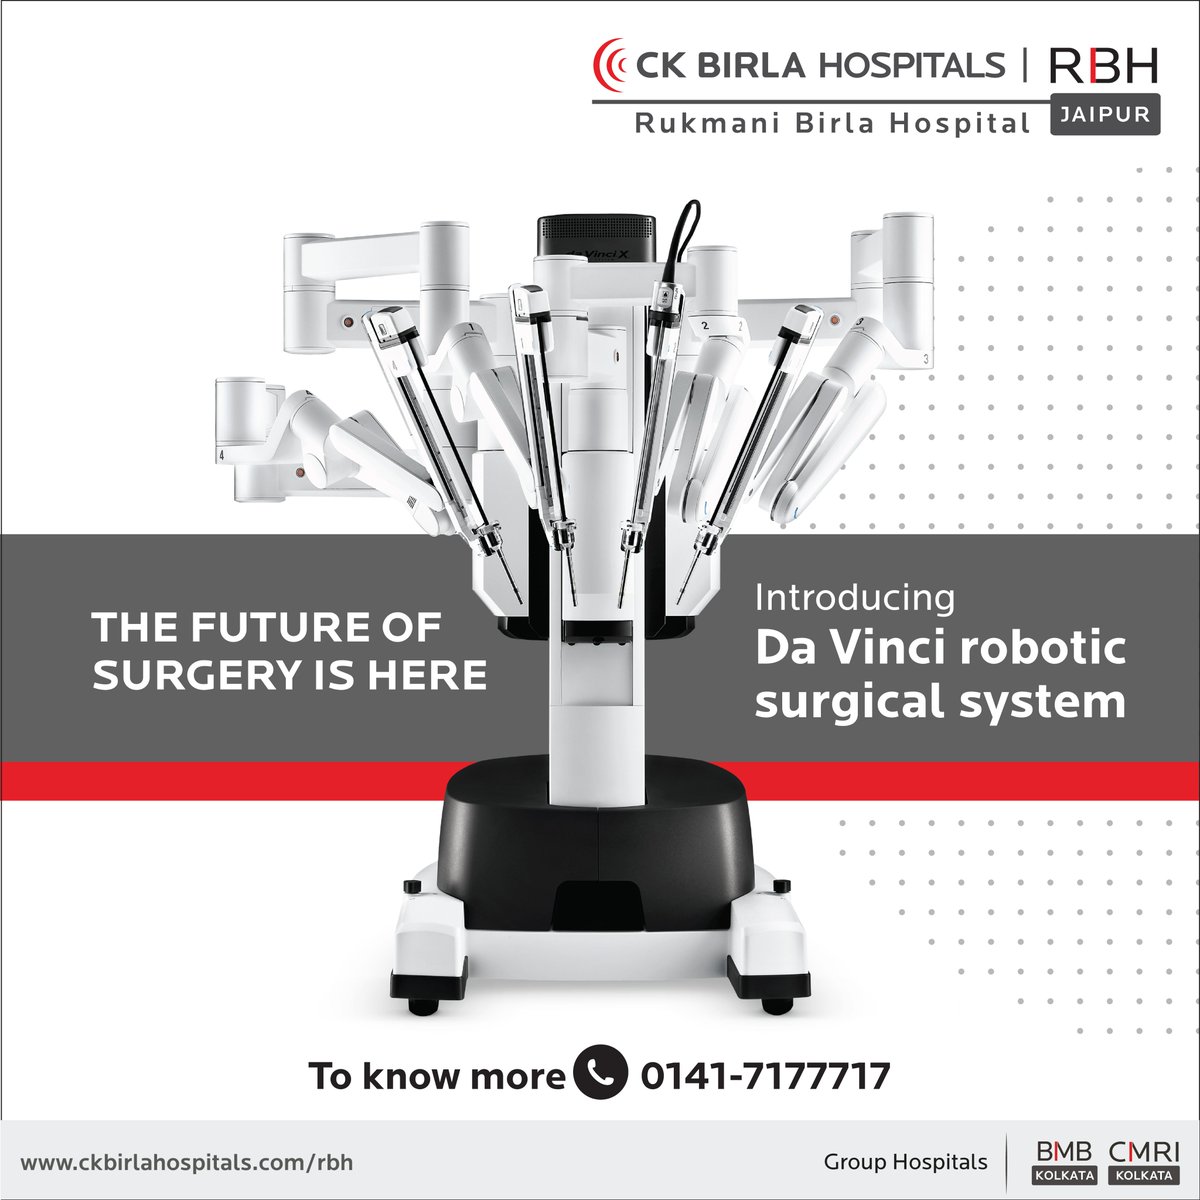 The Da Vinci Robotic Surgical System marks a significant leap forward in healthcare, promising a future where surgery is not just a procedure but also a perfected art.

#CKBirlaHospitalsInnovates #RoboticSurgery #MedicalAdvancements #FutureOfSurgery #RBHJaipur